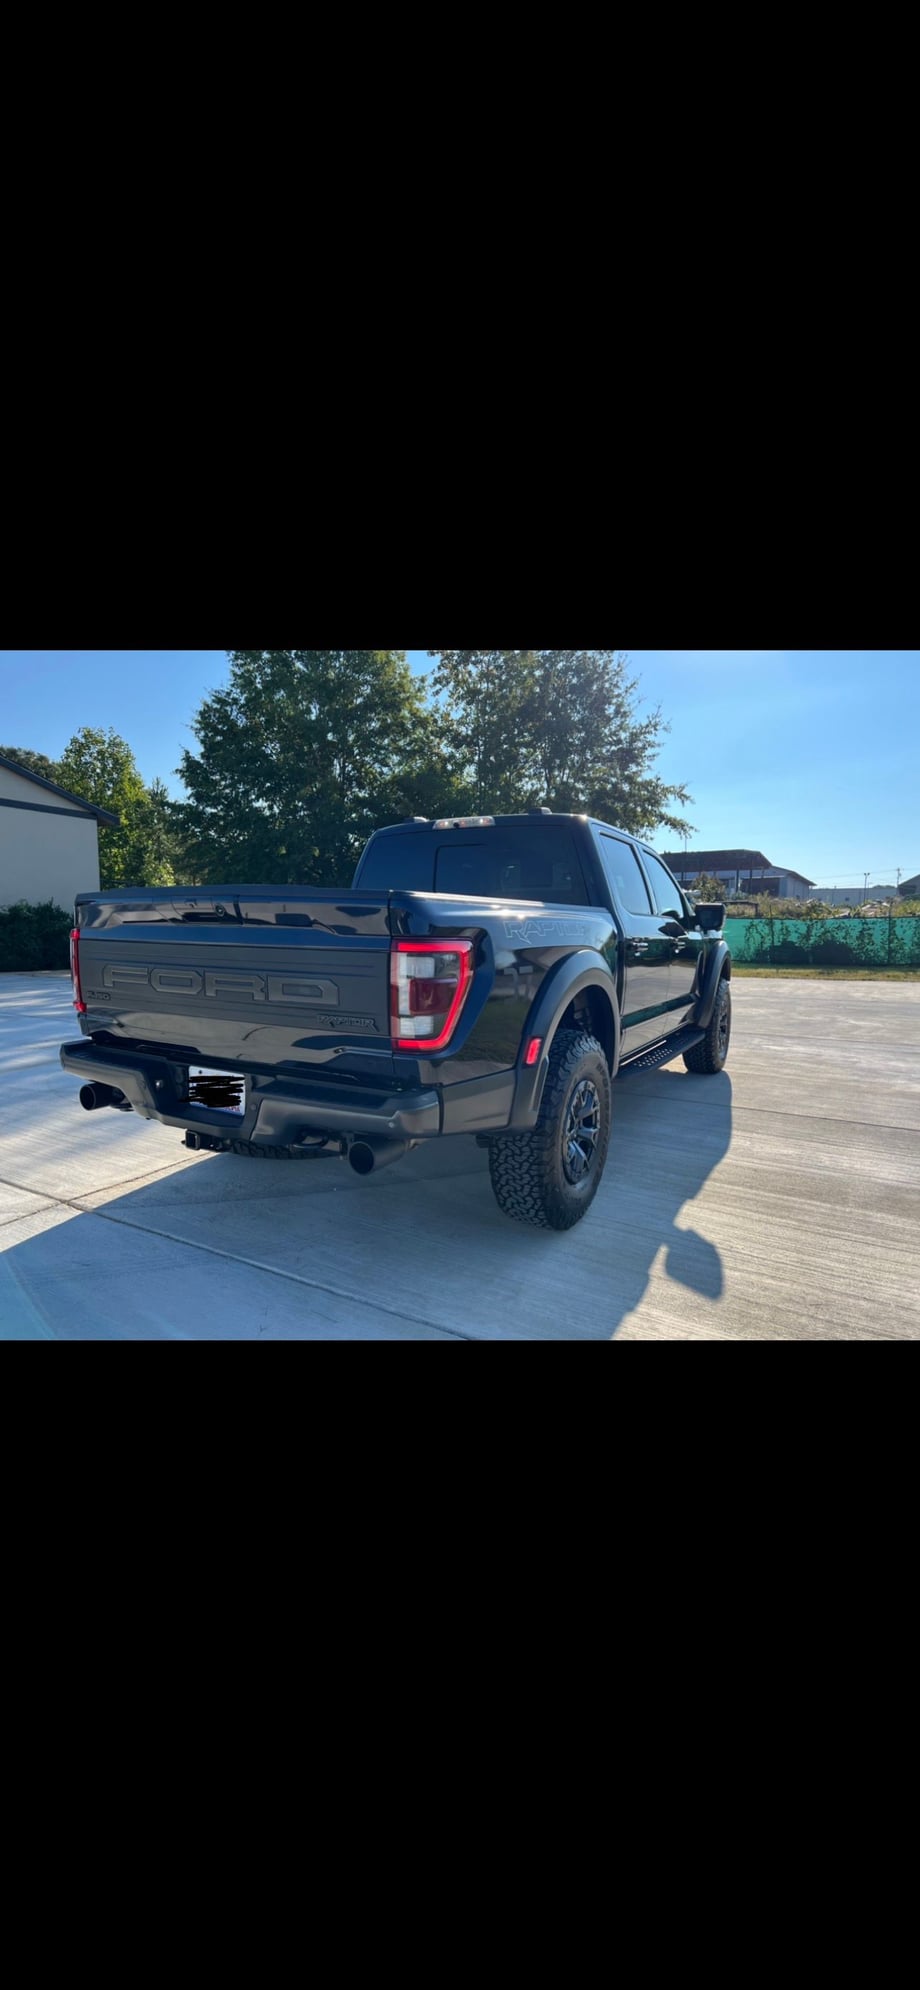 2021 Ford F-150 - 2021 Ford F-150 Raptor 37PP Antimatter Blue 10k Miles - New - VIN 1FTFW1RG3MFC17737 - 10,800 Miles - 6 cyl - 4WD - Automatic - Truck - Blue - Charlotte, NC 28210, United States